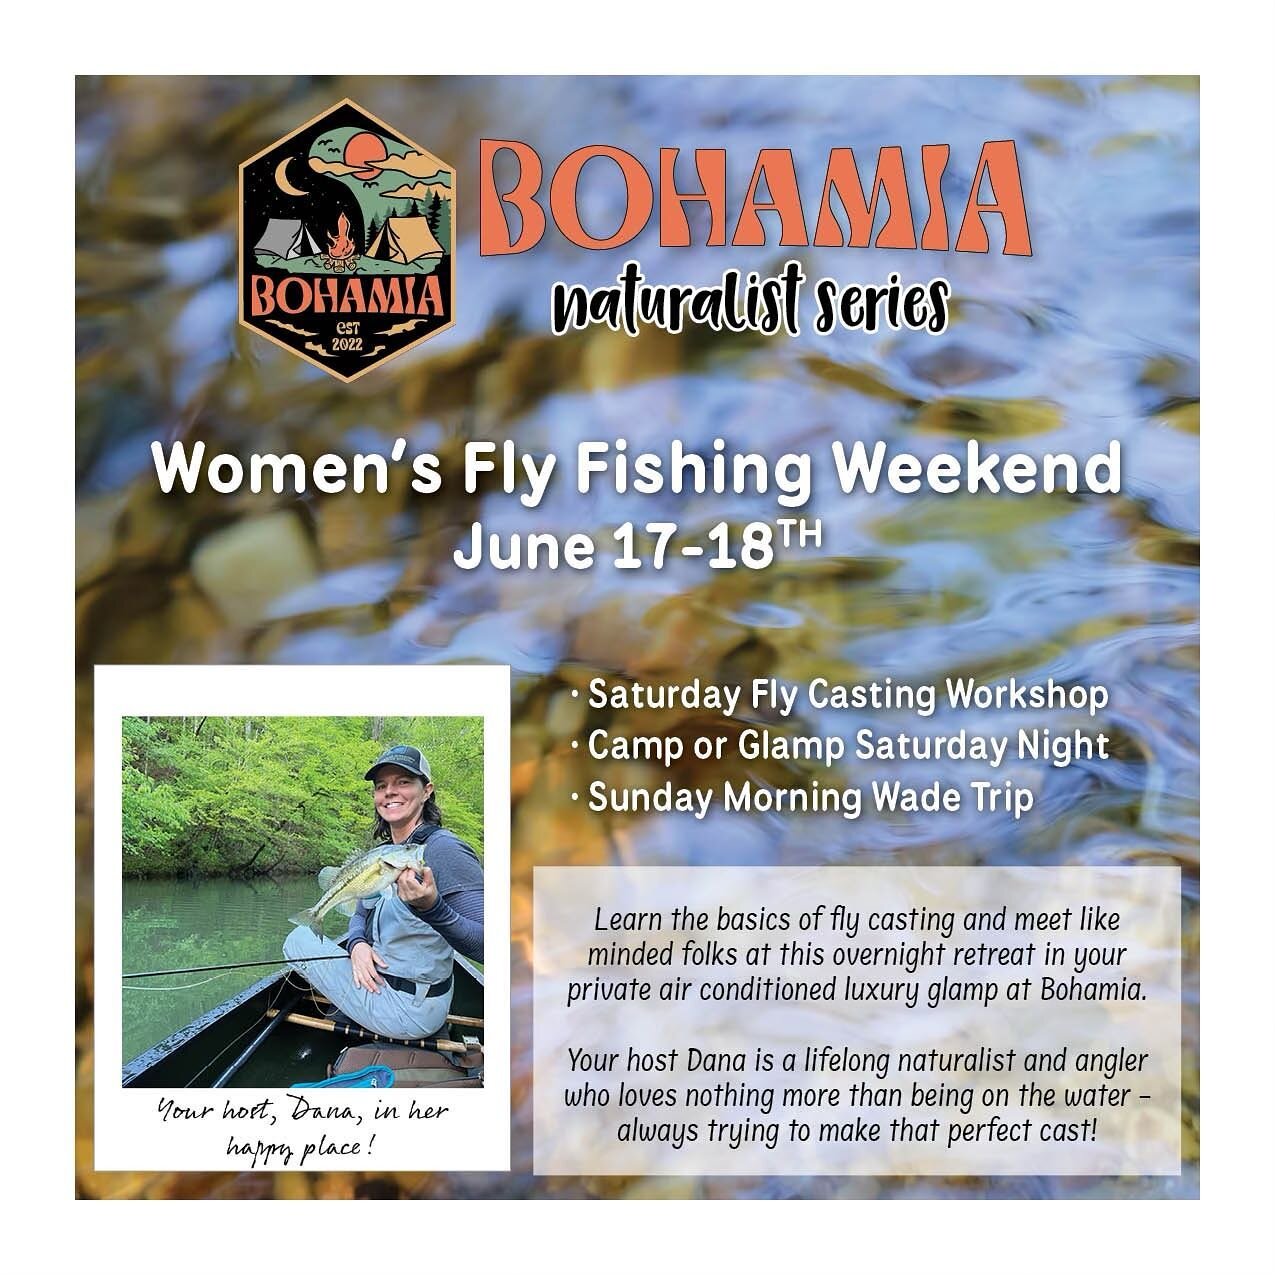 Excited to kick off the Bohamia Naturalist Series with our Women&rsquo;s Fly Fishing Weekend hosted by @fishinyogini  Learn the basics of fly casting with new friends while enjoying the wilderness of Bohamia. Casting instruction Saturday, overnight c